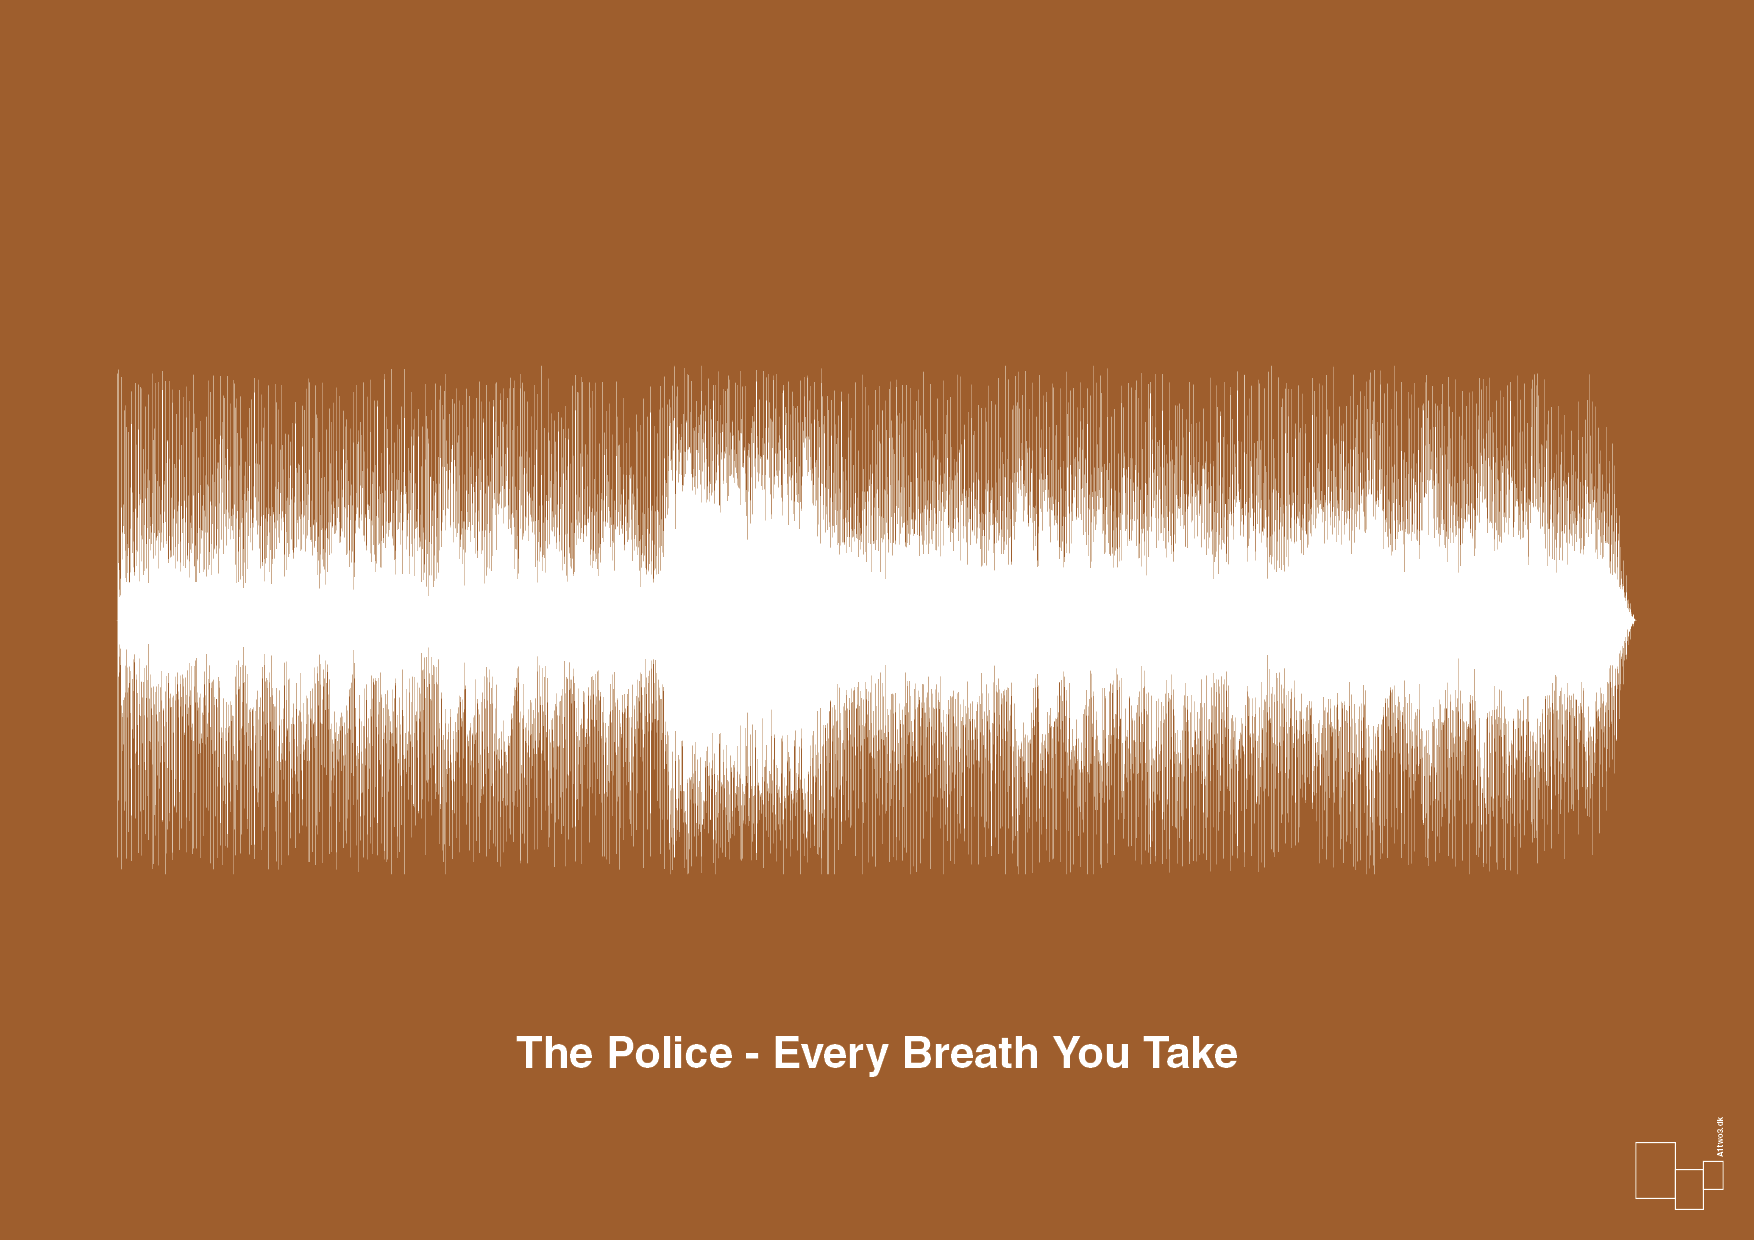 the police - every breath you take - Plakat med Musik i Cognac